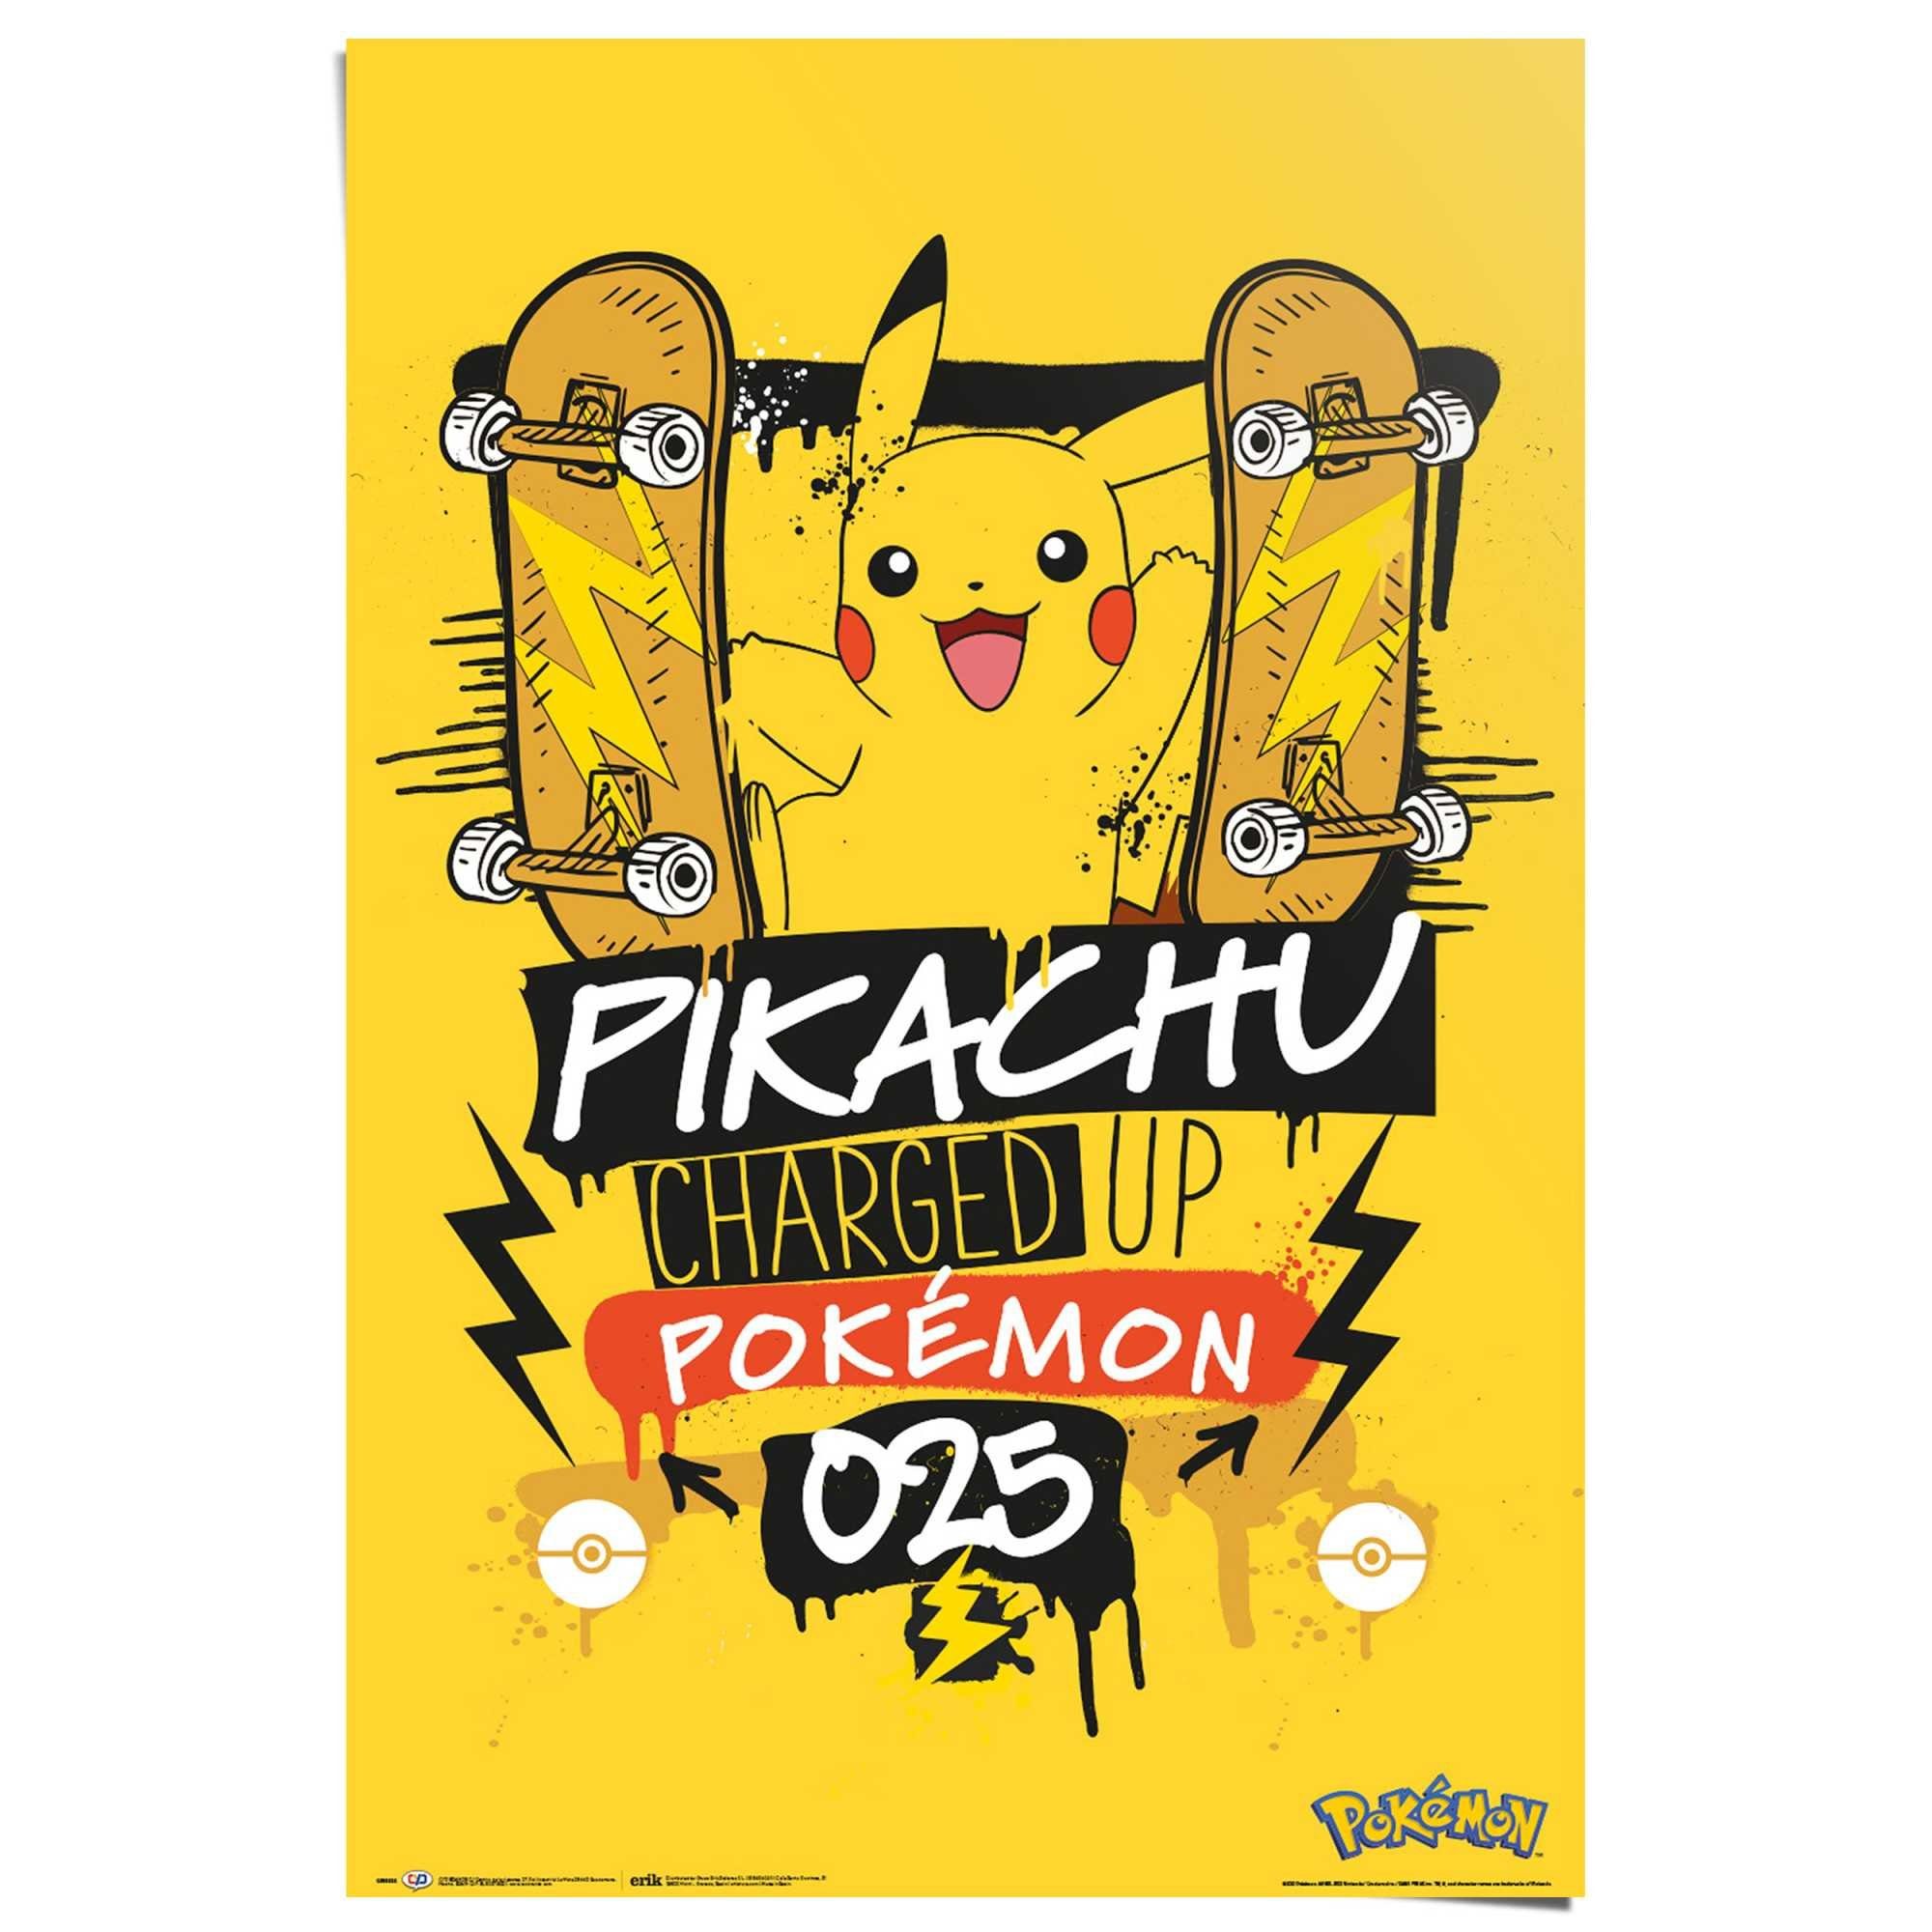 pikachu Reinders! Pokemon charged up 025 - Poster